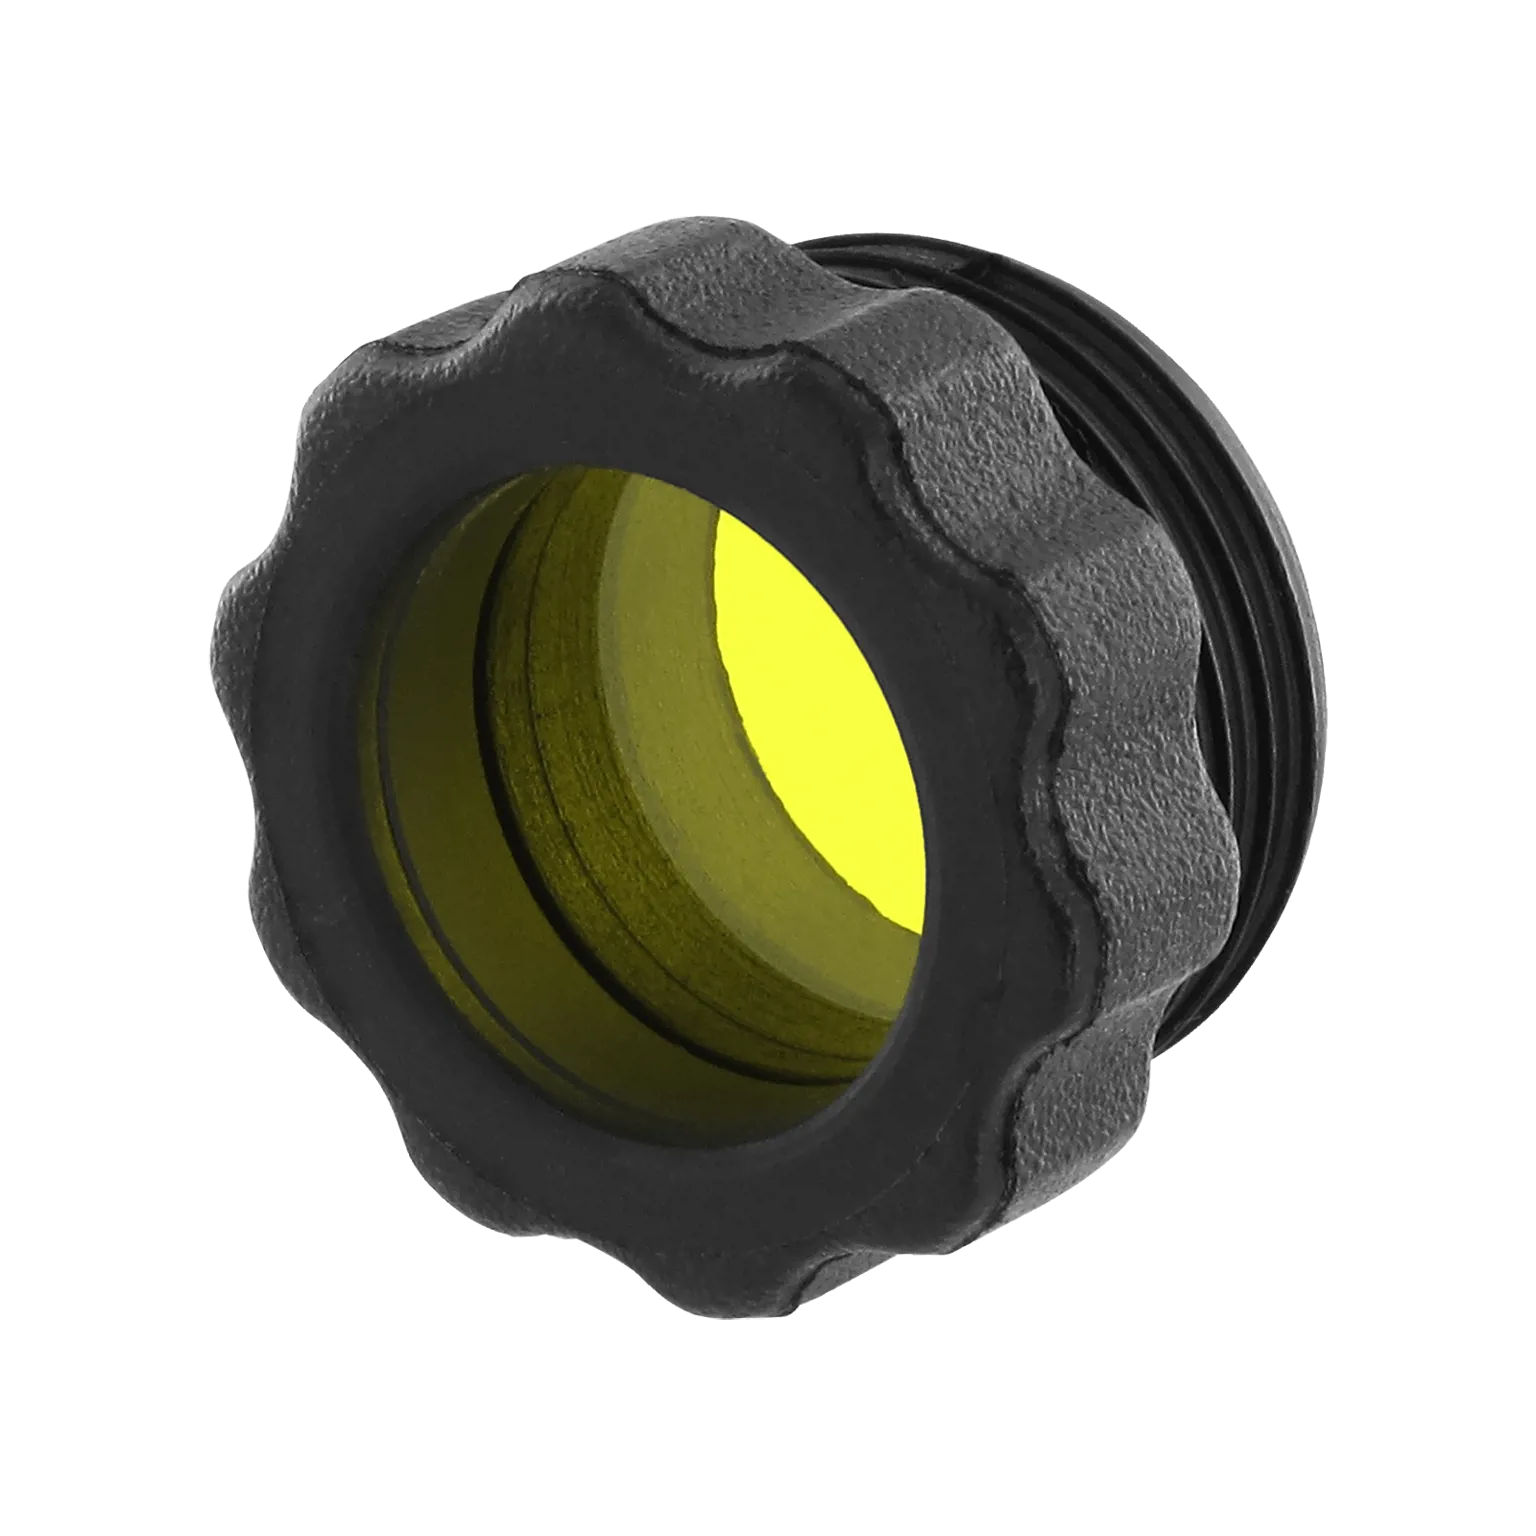 Yellow Filter for contrast increase fits 30 mm sights - 1